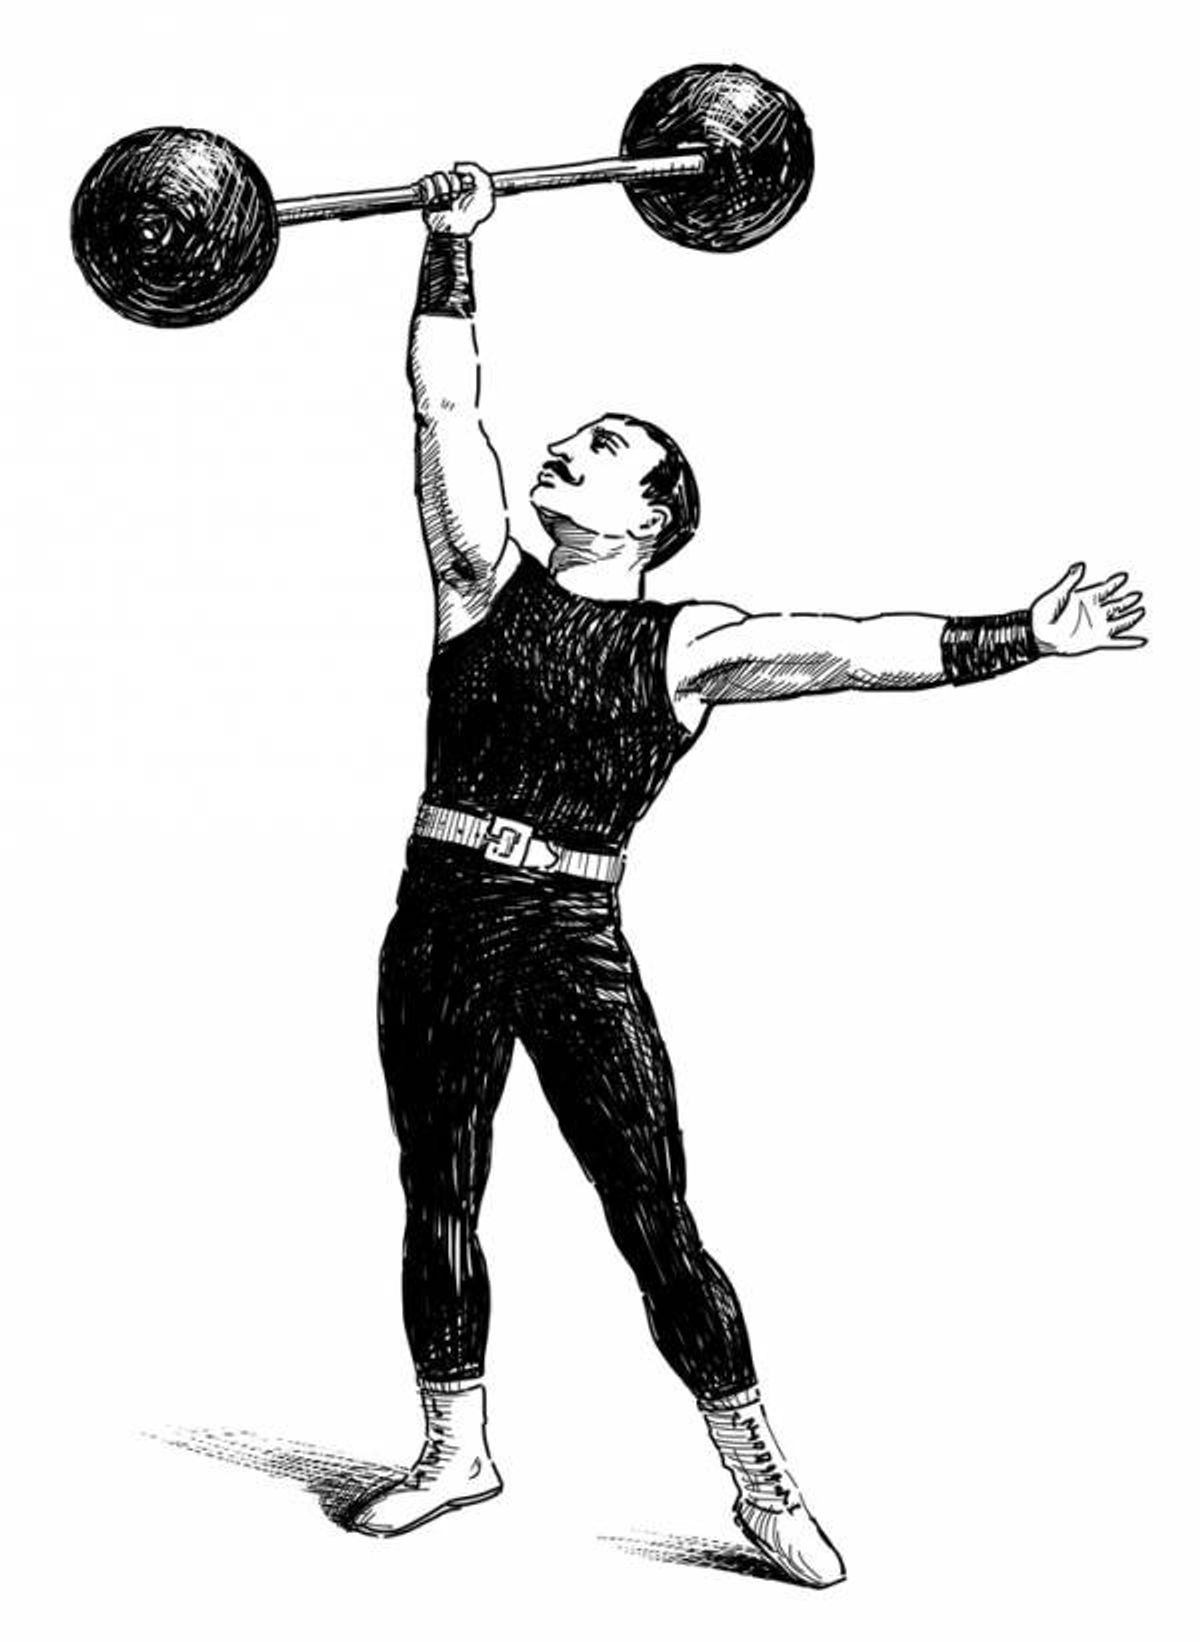 On Weightlifting